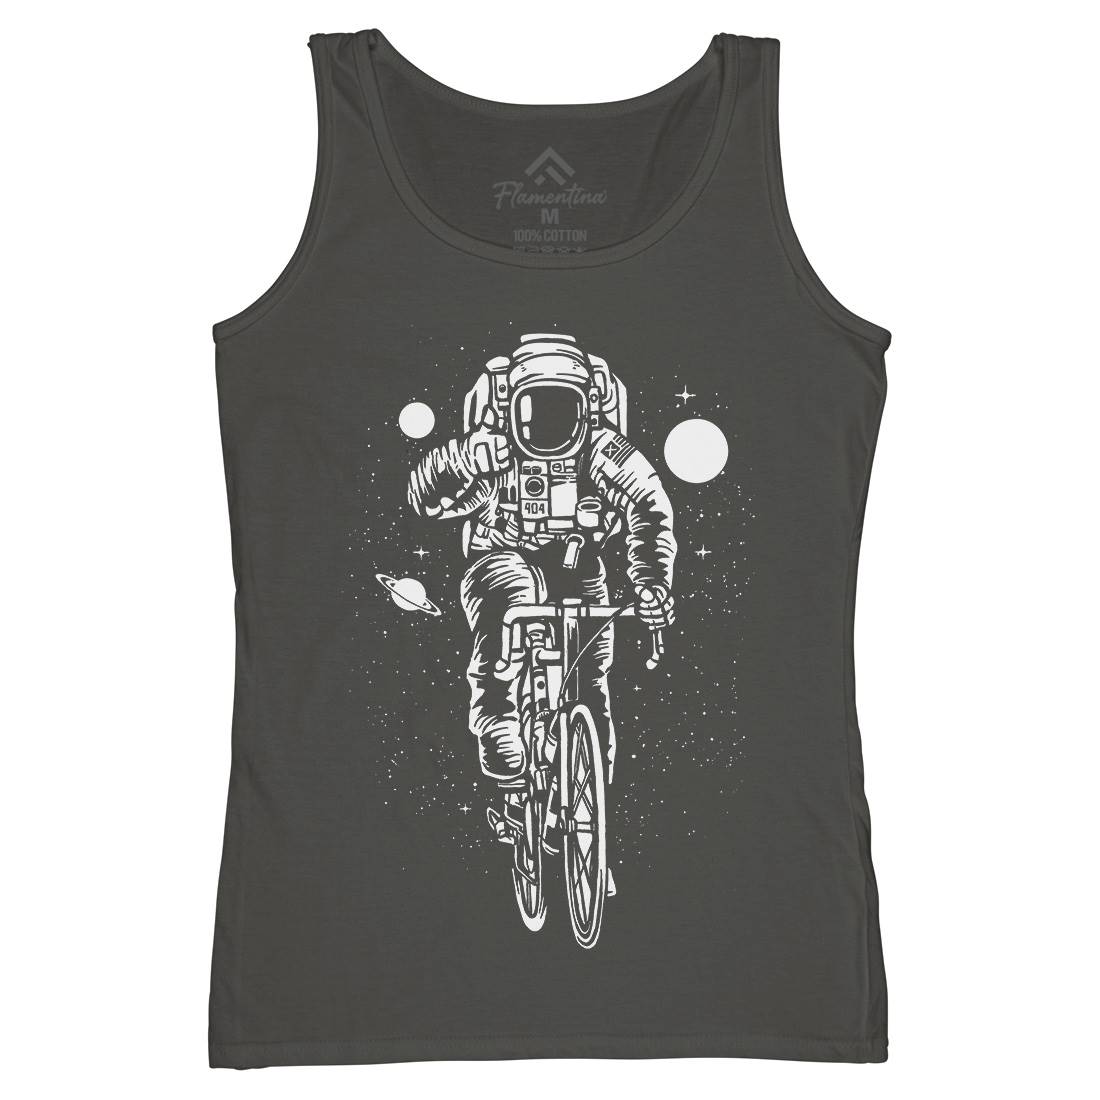 Astronaut Bicycle Womens Organic Tank Top Vest Space A503